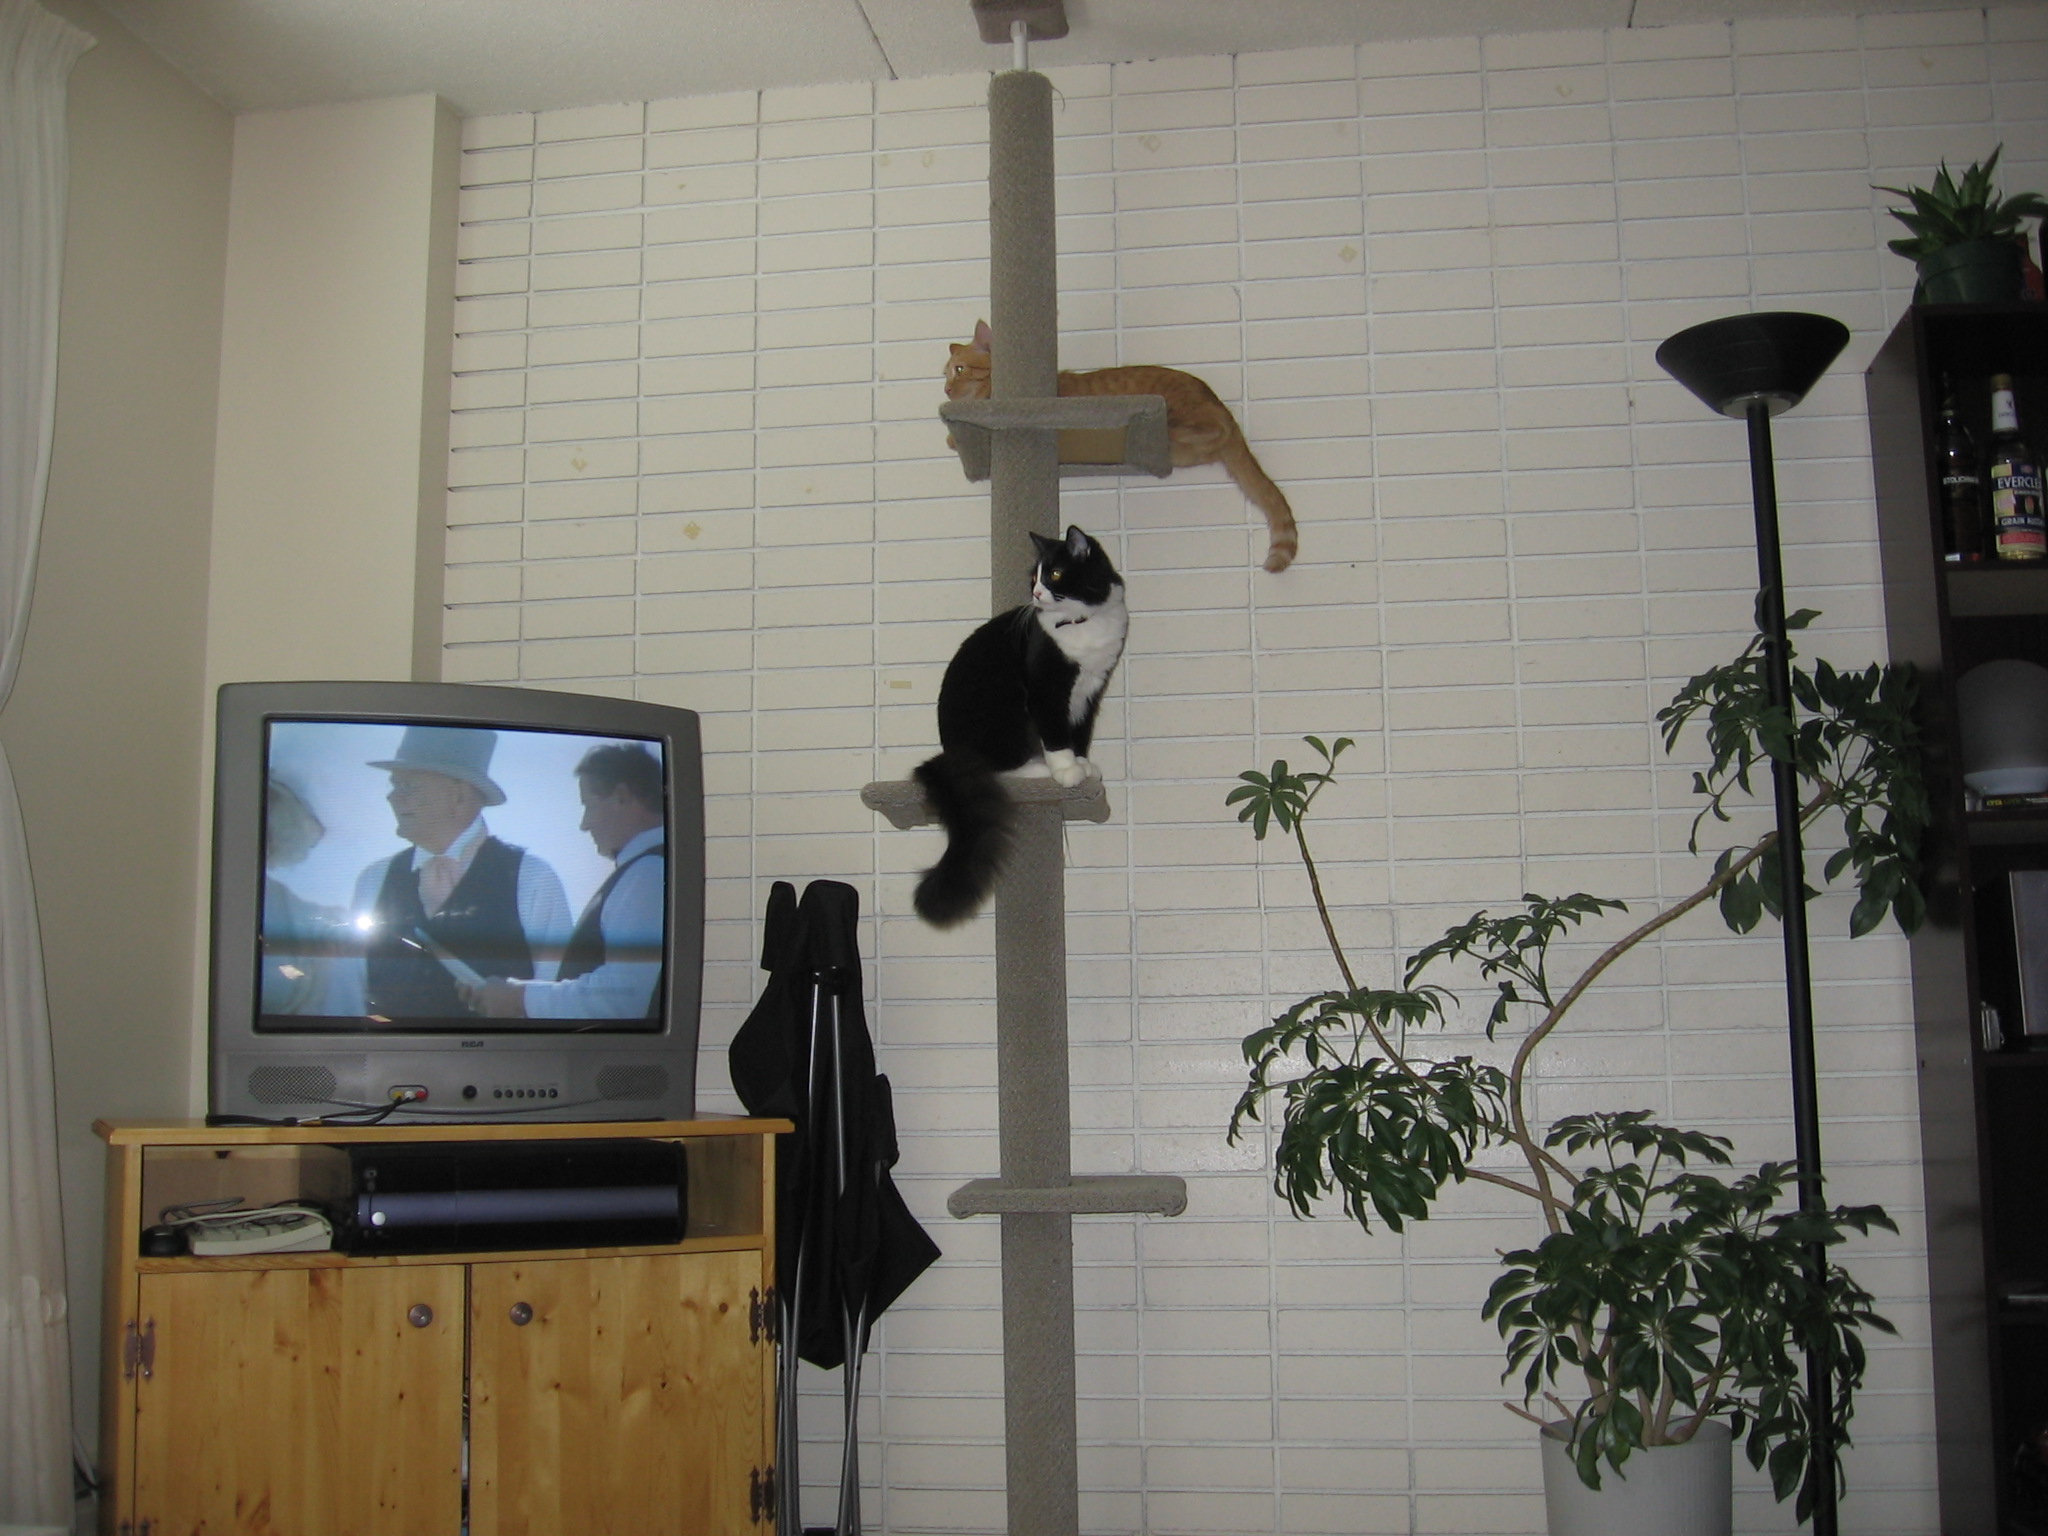 Nikita and Jack on the cat tree, beside the TV to the left, and a lamp and plants to the right.